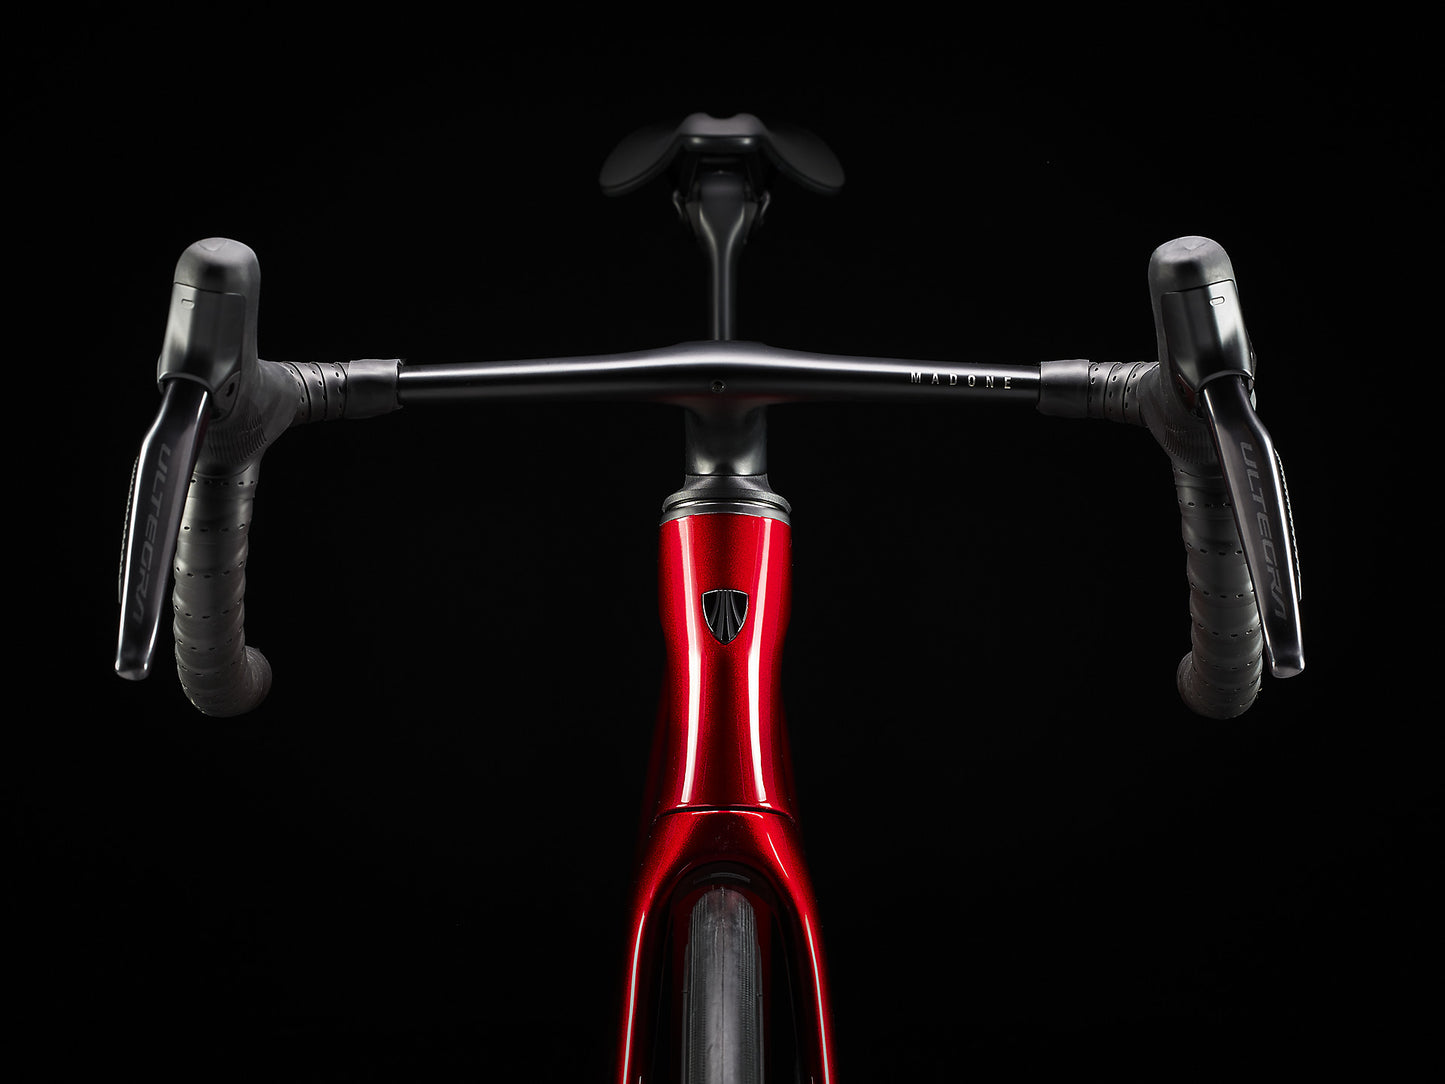 Madone SLR 7 Gen 7 Red to Red Carbon